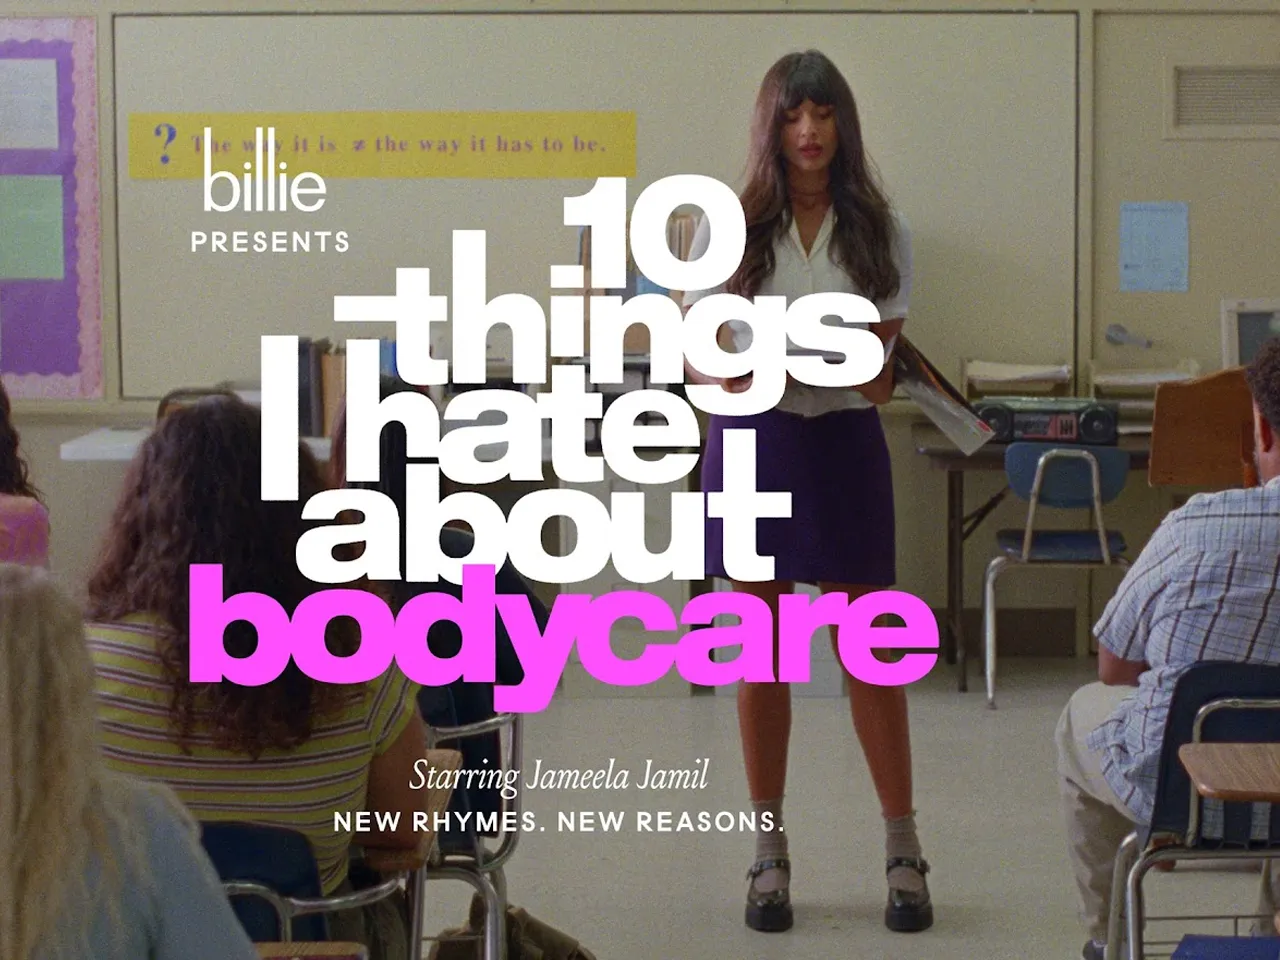 Billie aims to puts an end to unrealistic beauty standards in new campaign